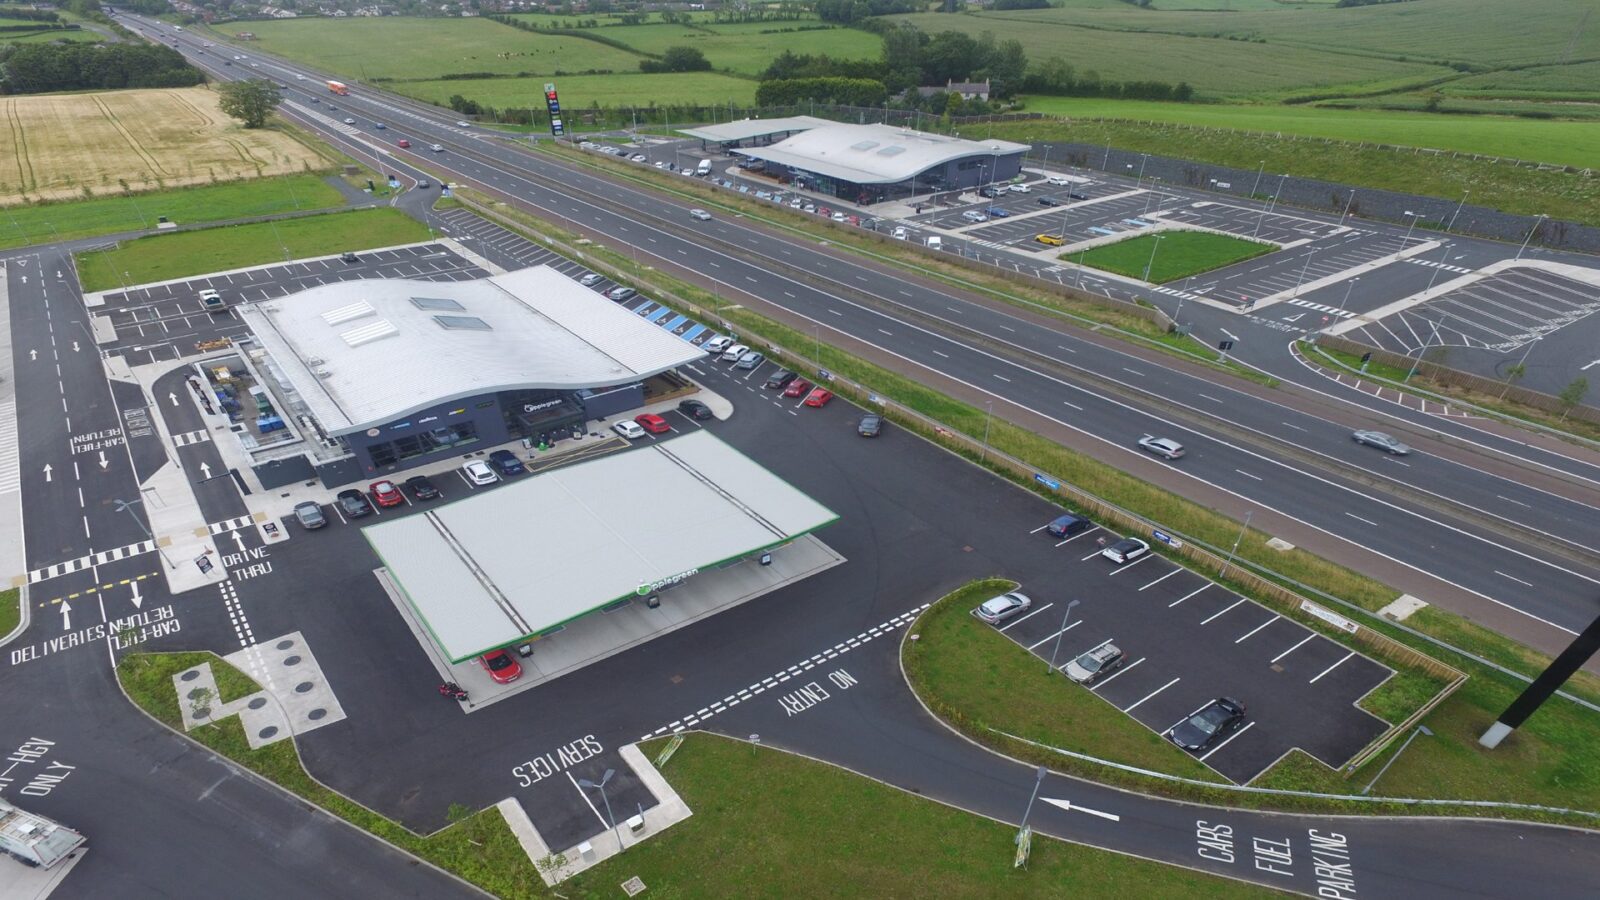 Aerial View of Applegreen service station